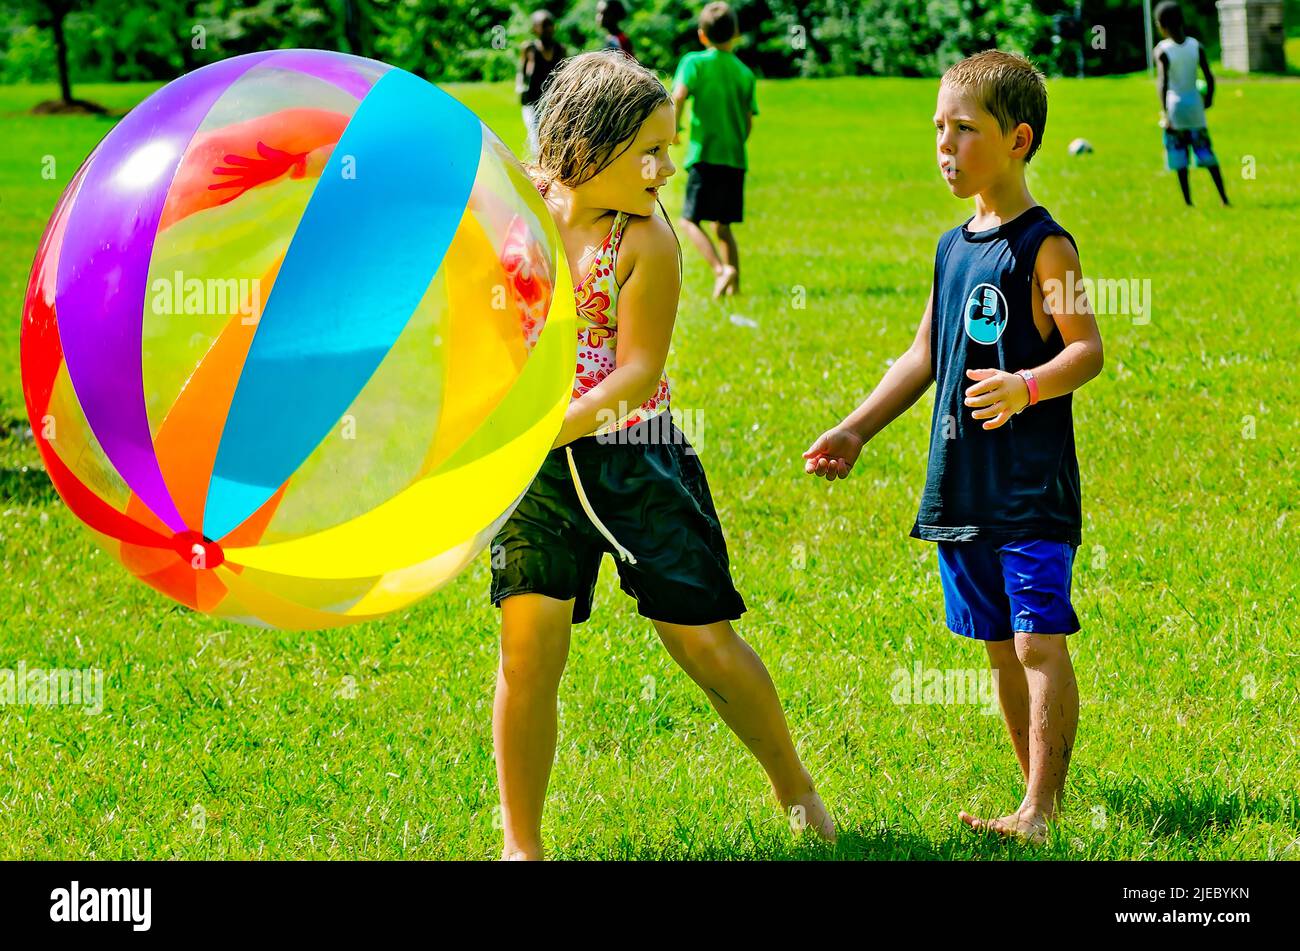 A girl plays keep-away with a giant beach ball as a boy tries to intercept it, July 27, 2012, in Columbus, Mississippi. Stock Photo